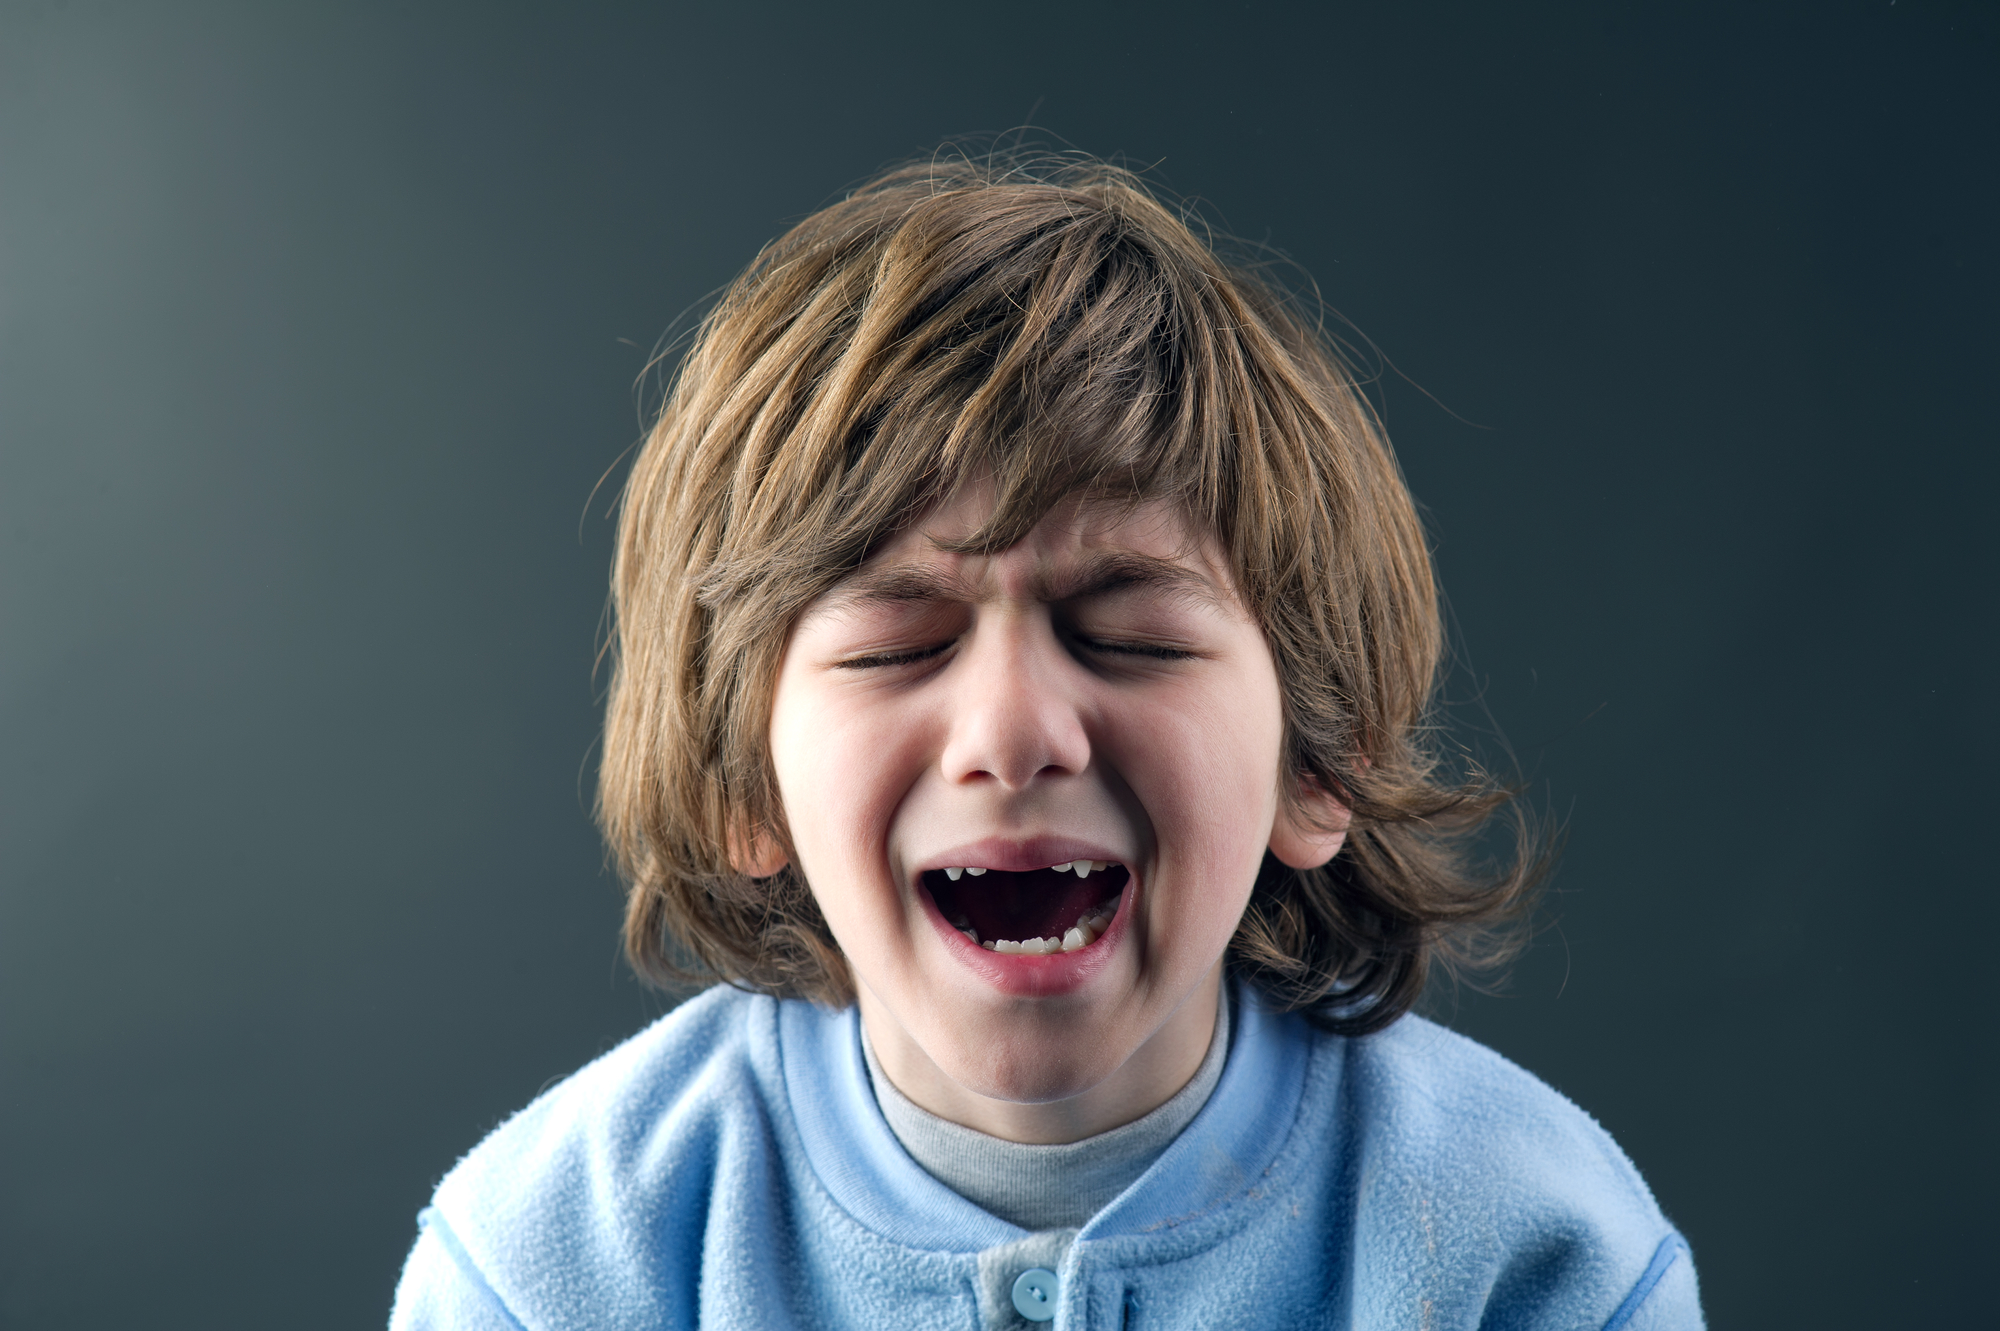 Medication withdrawal in children